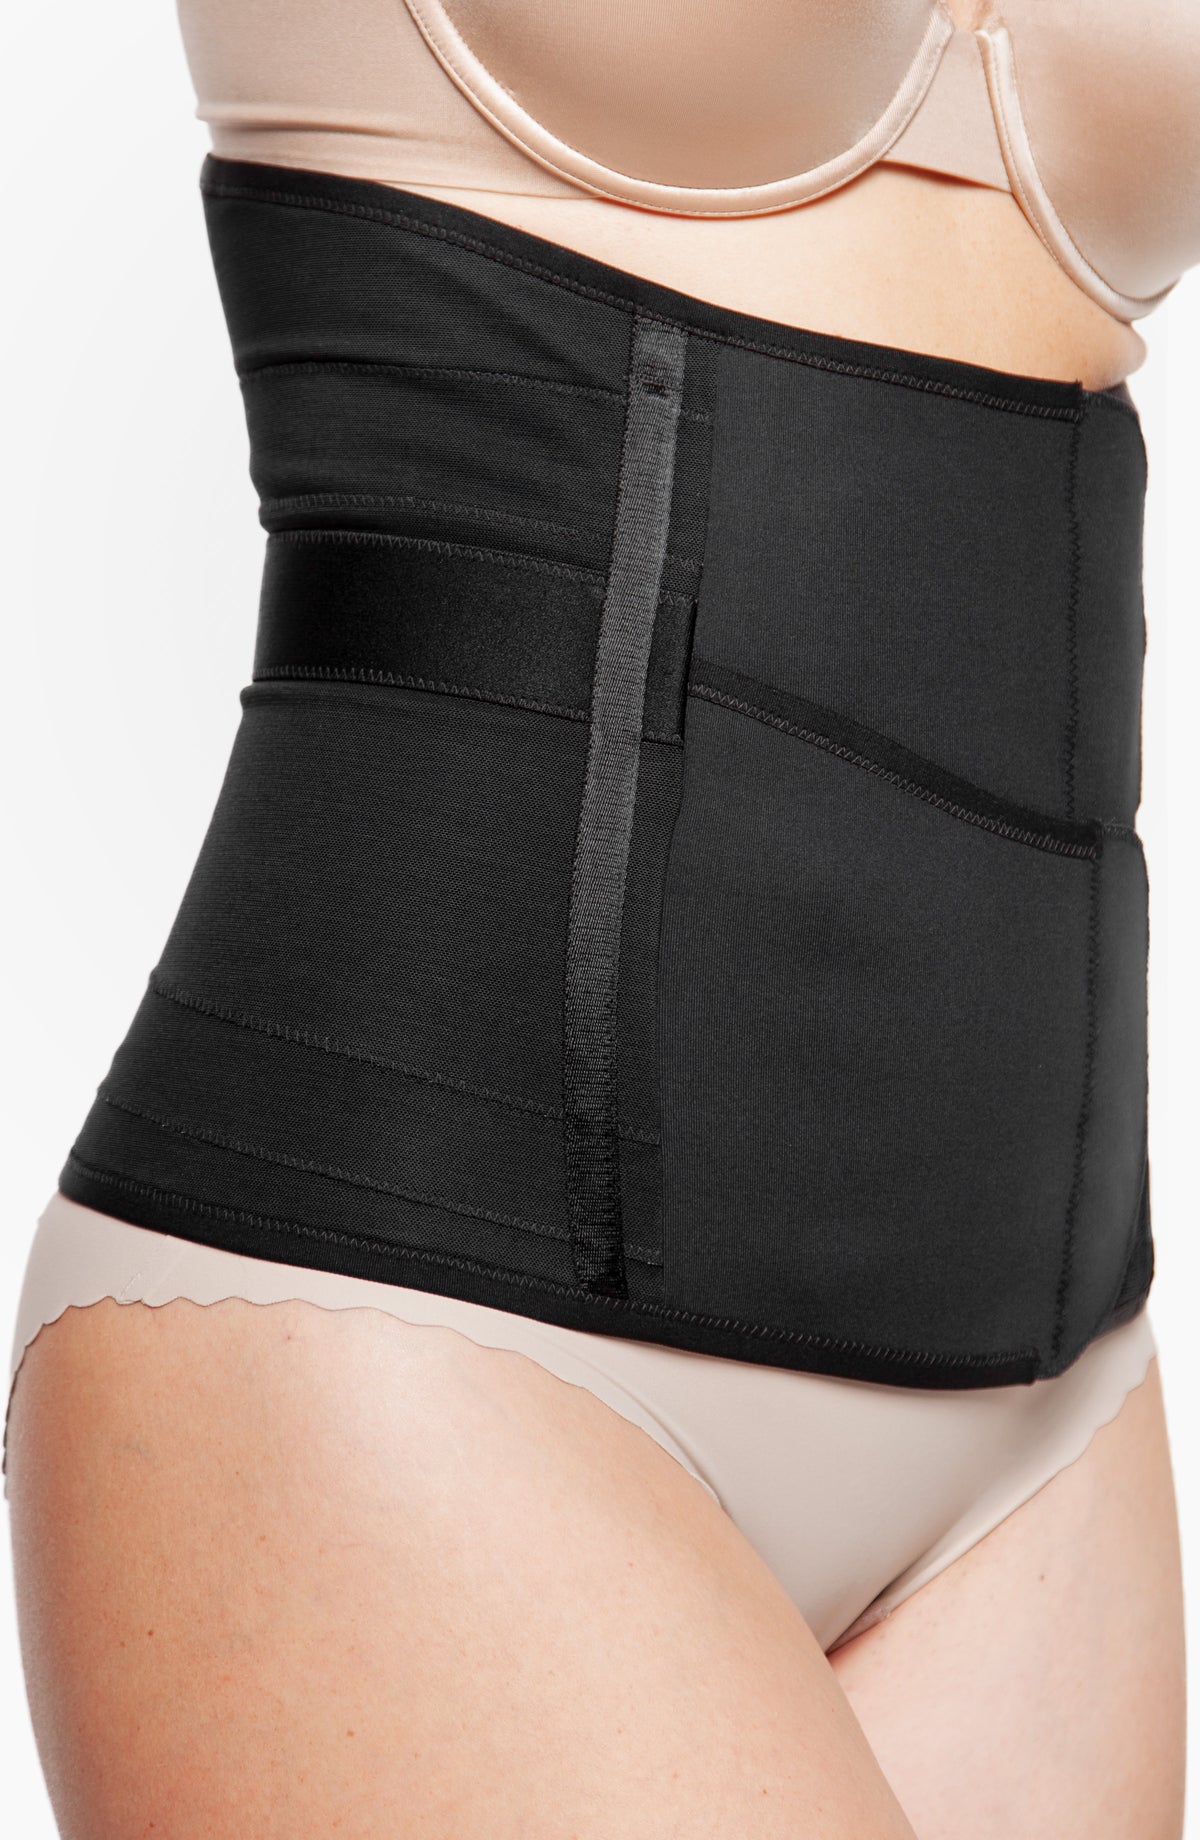 Belly Bandit Original Belly Wrap, Black - Extra Small